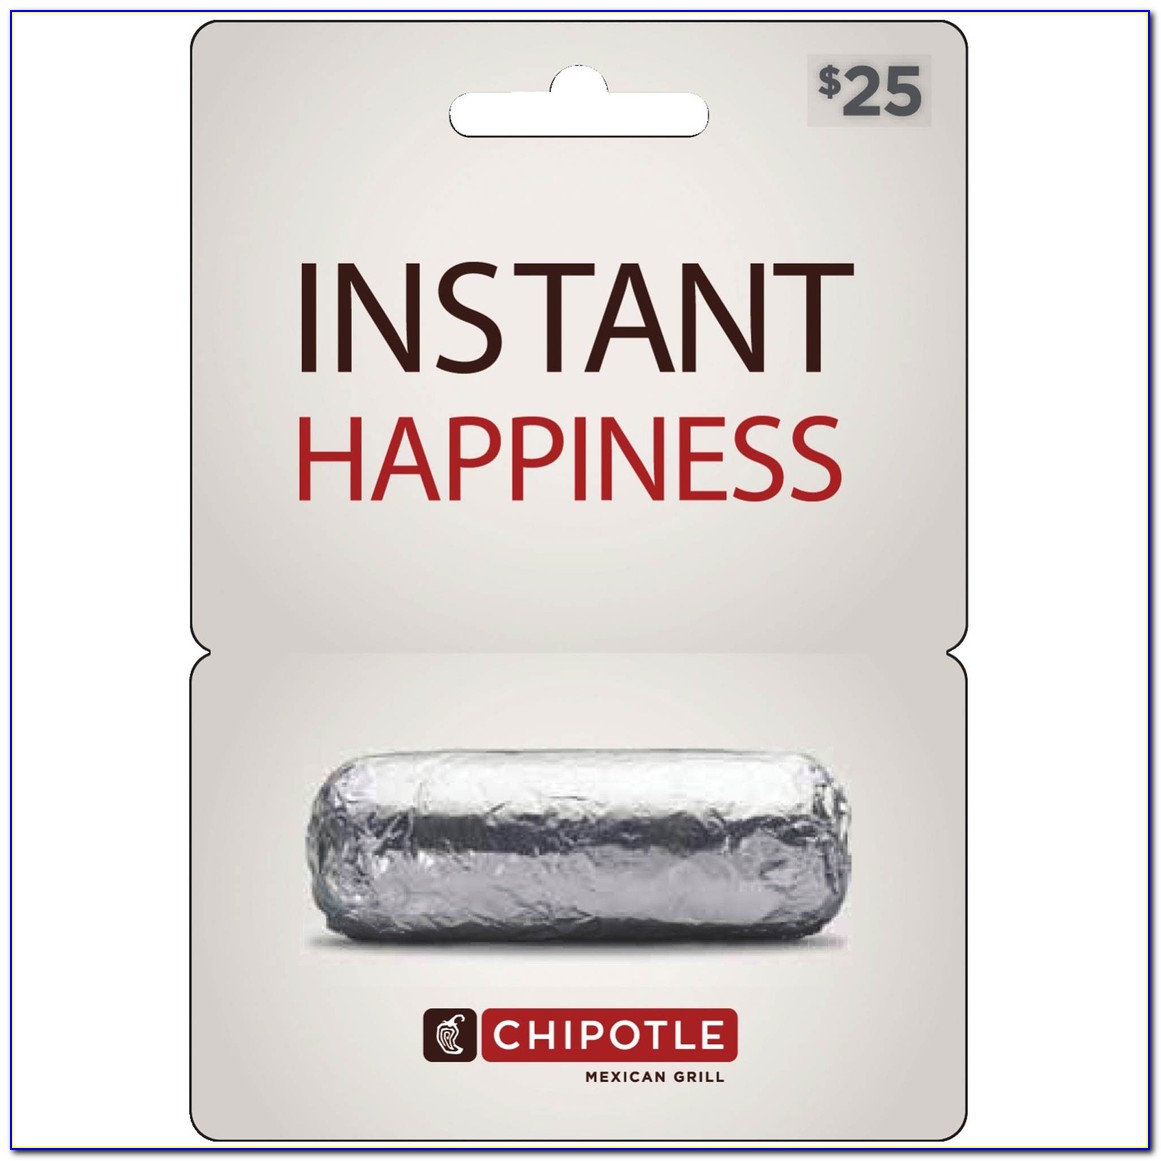 Free Entree Chipotle Card